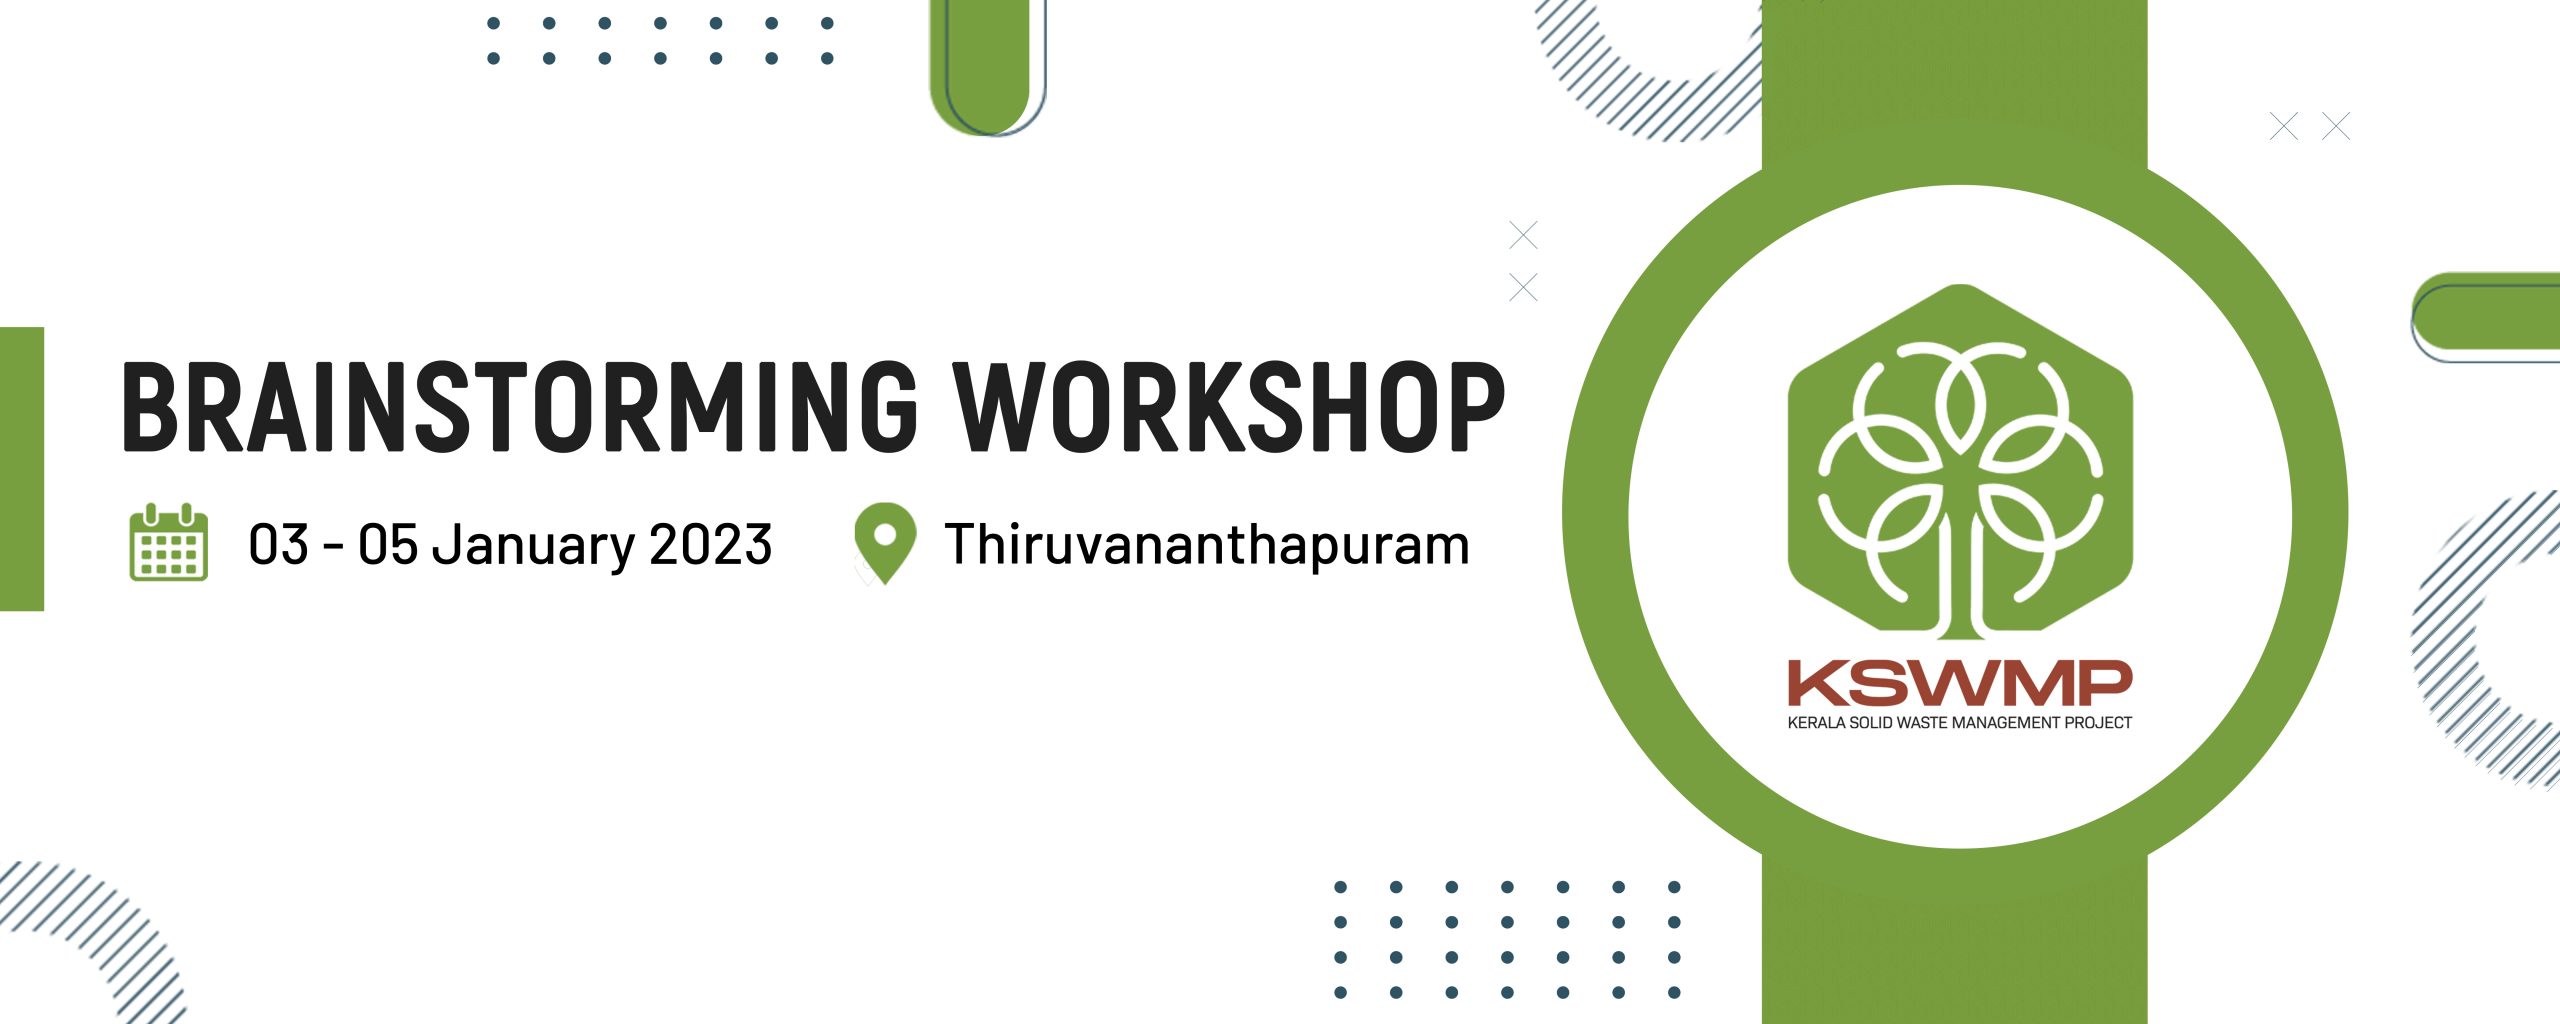 Kerala Solid Waste Management Project is organising a Brainstorming workshop